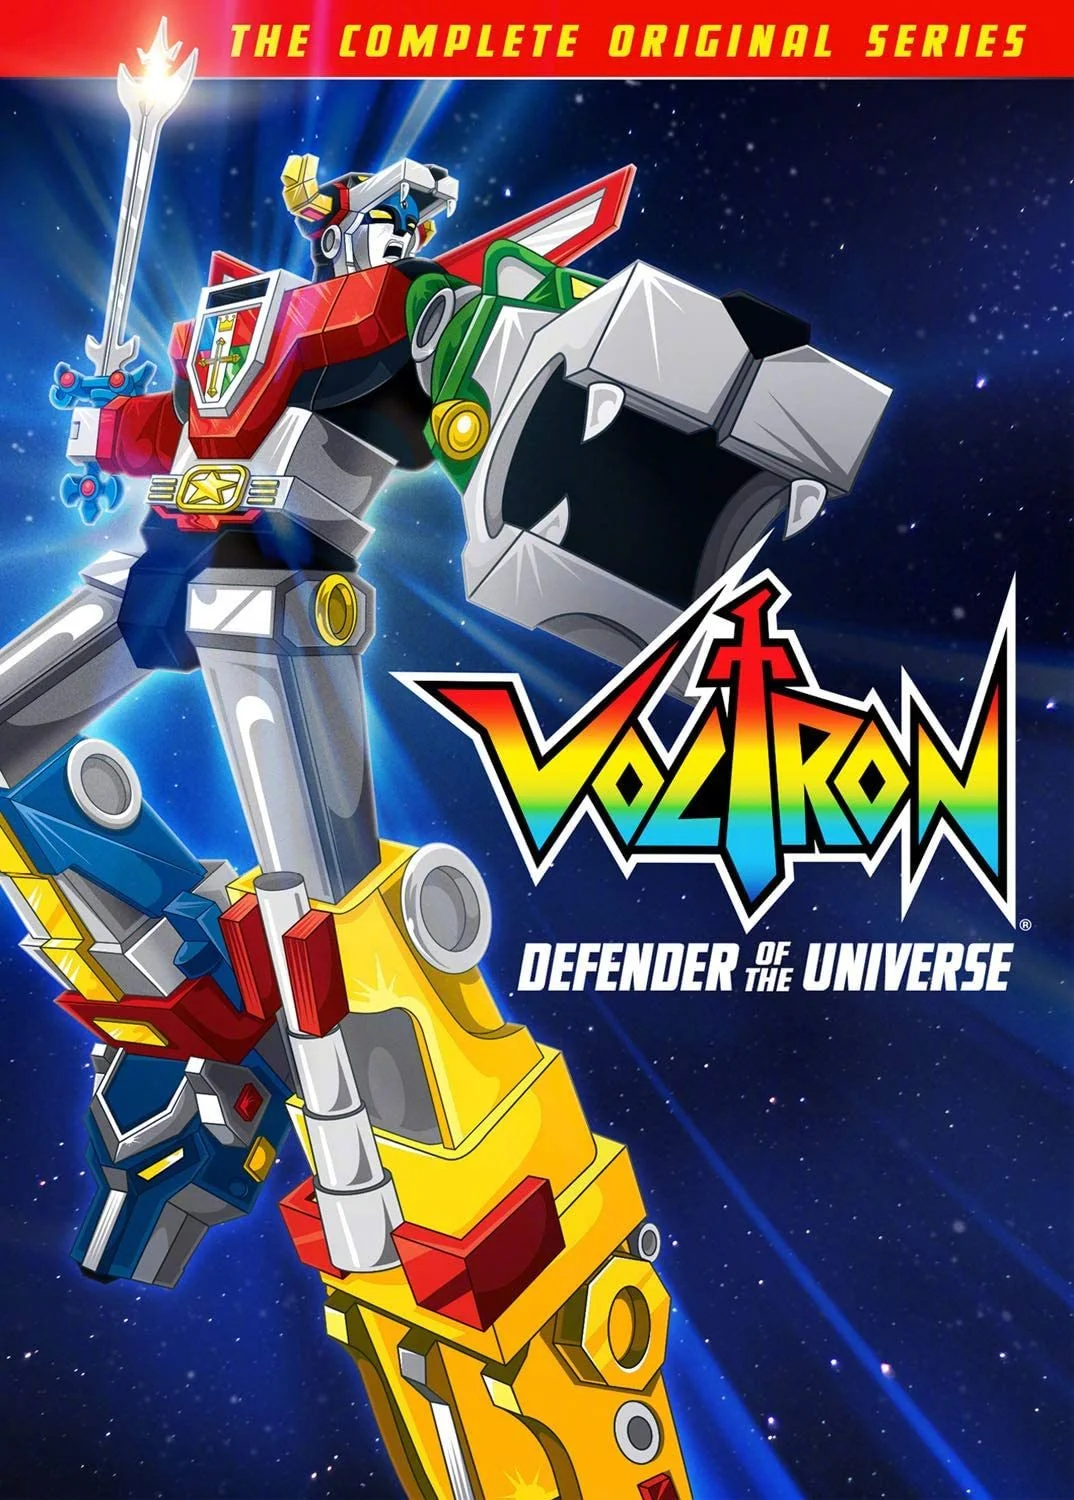 "Voltron" will shoot live action, directed by Rawson Marshall Thurber